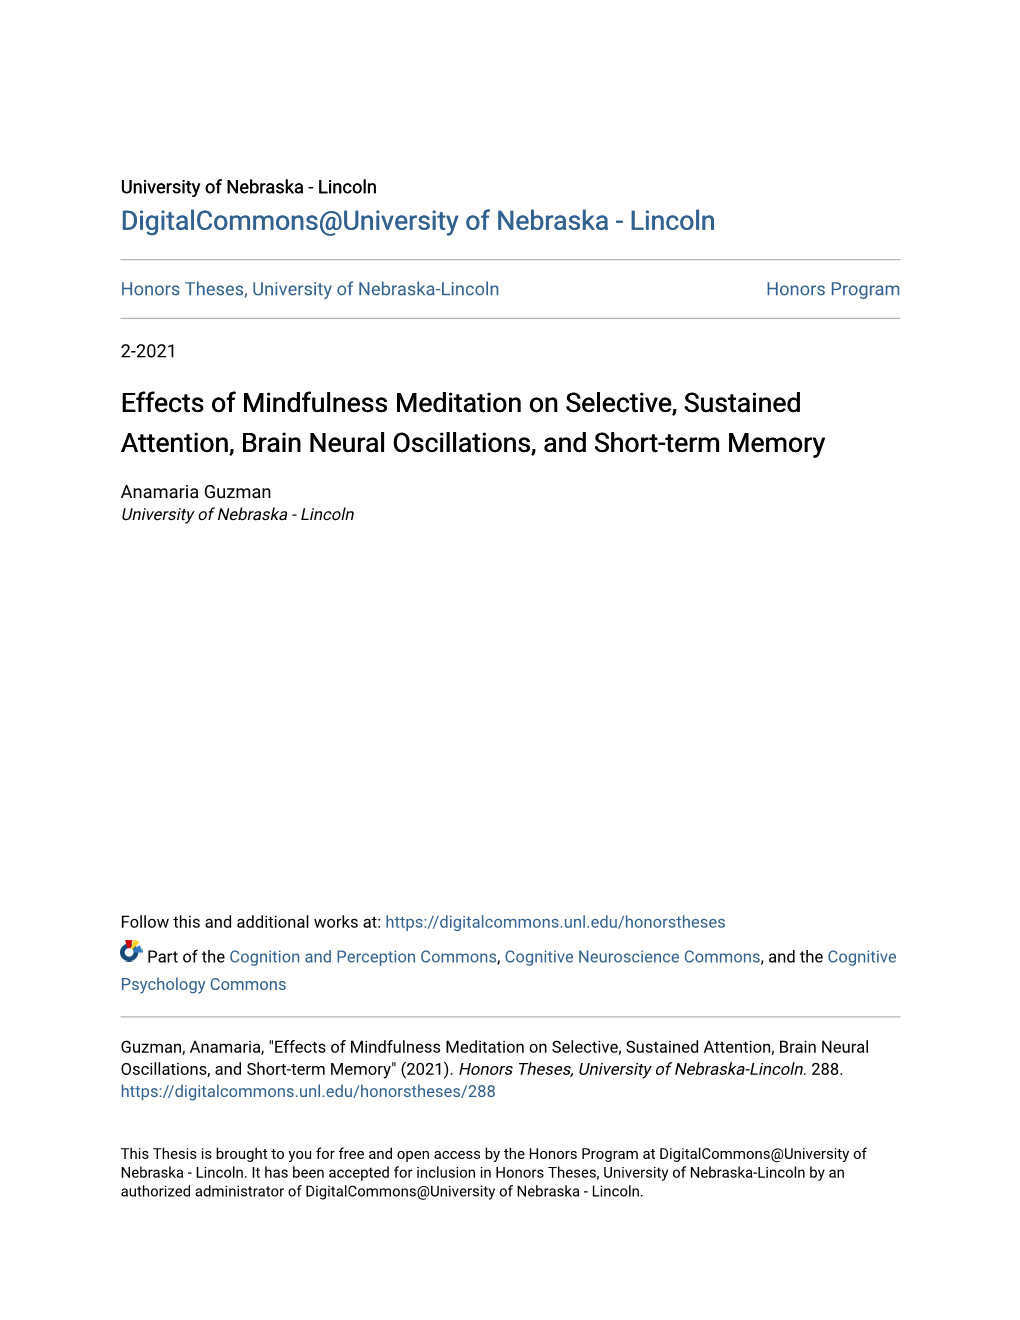 Effects of Mindfulness Meditation on Selective, Sustained Attention, Brain Neural Oscillations, and Short-Term Memory